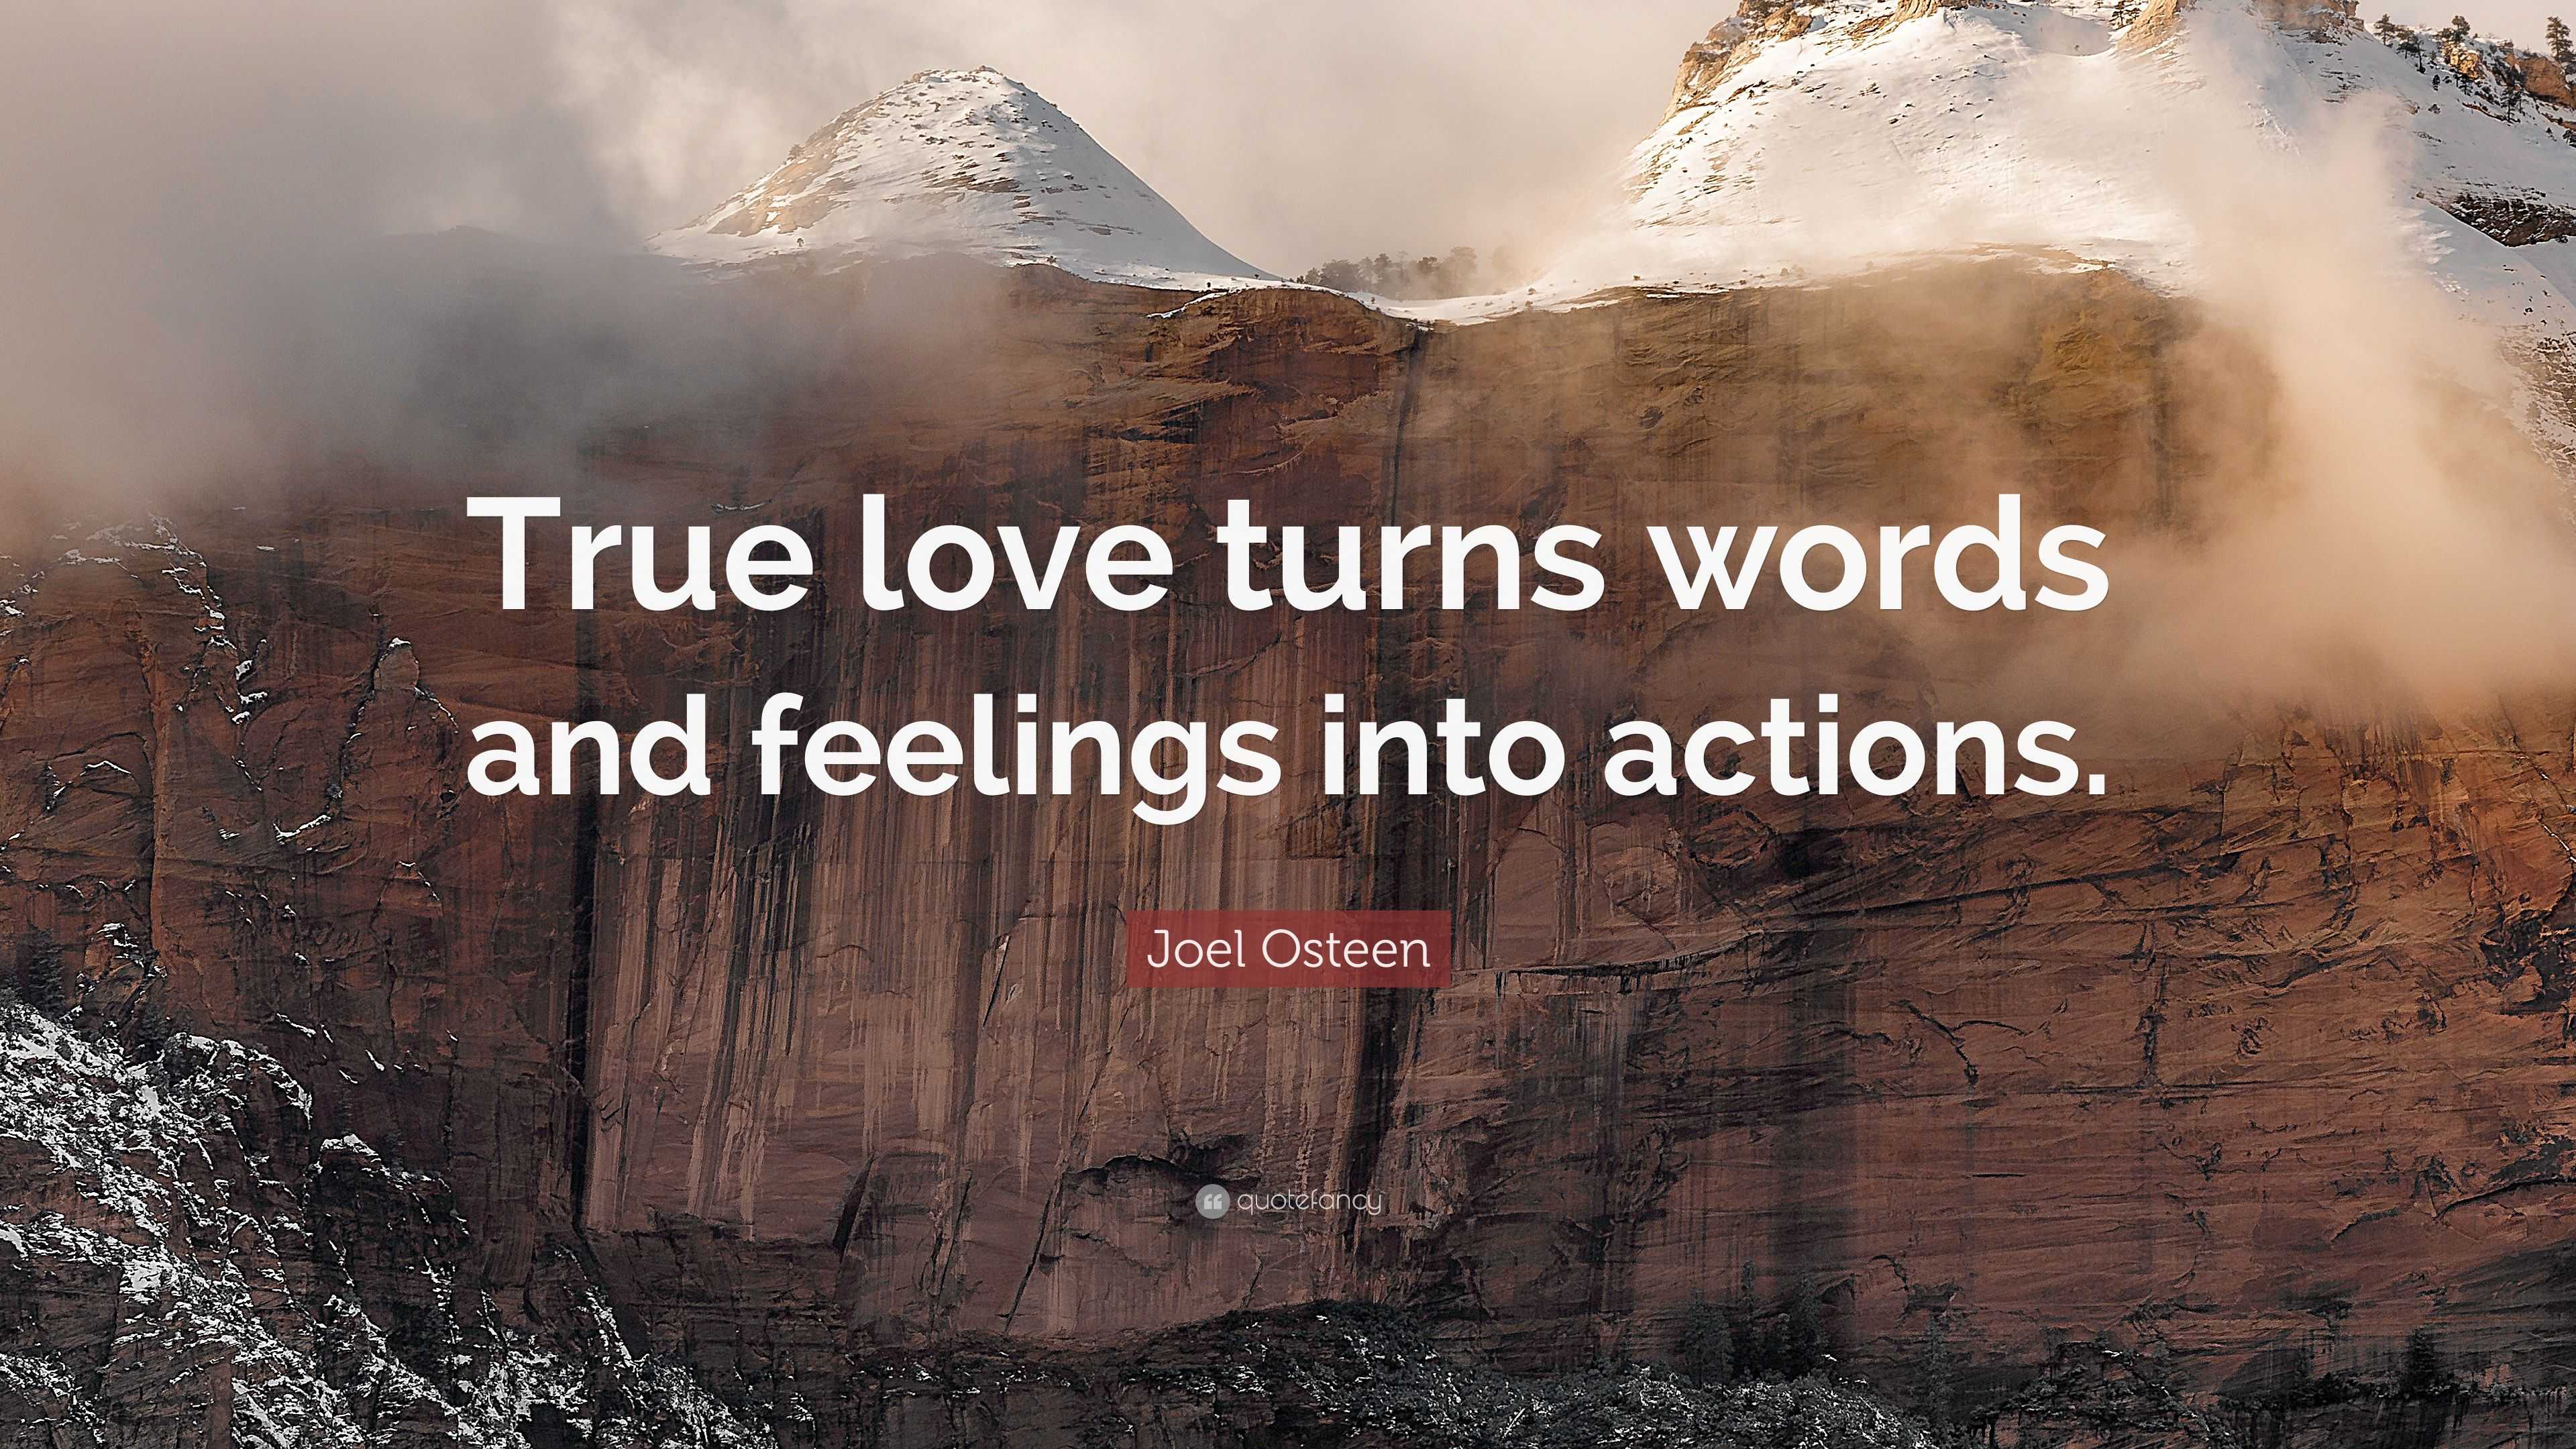 Joel Osteen Quote “True love turns words and feelings into actions ”